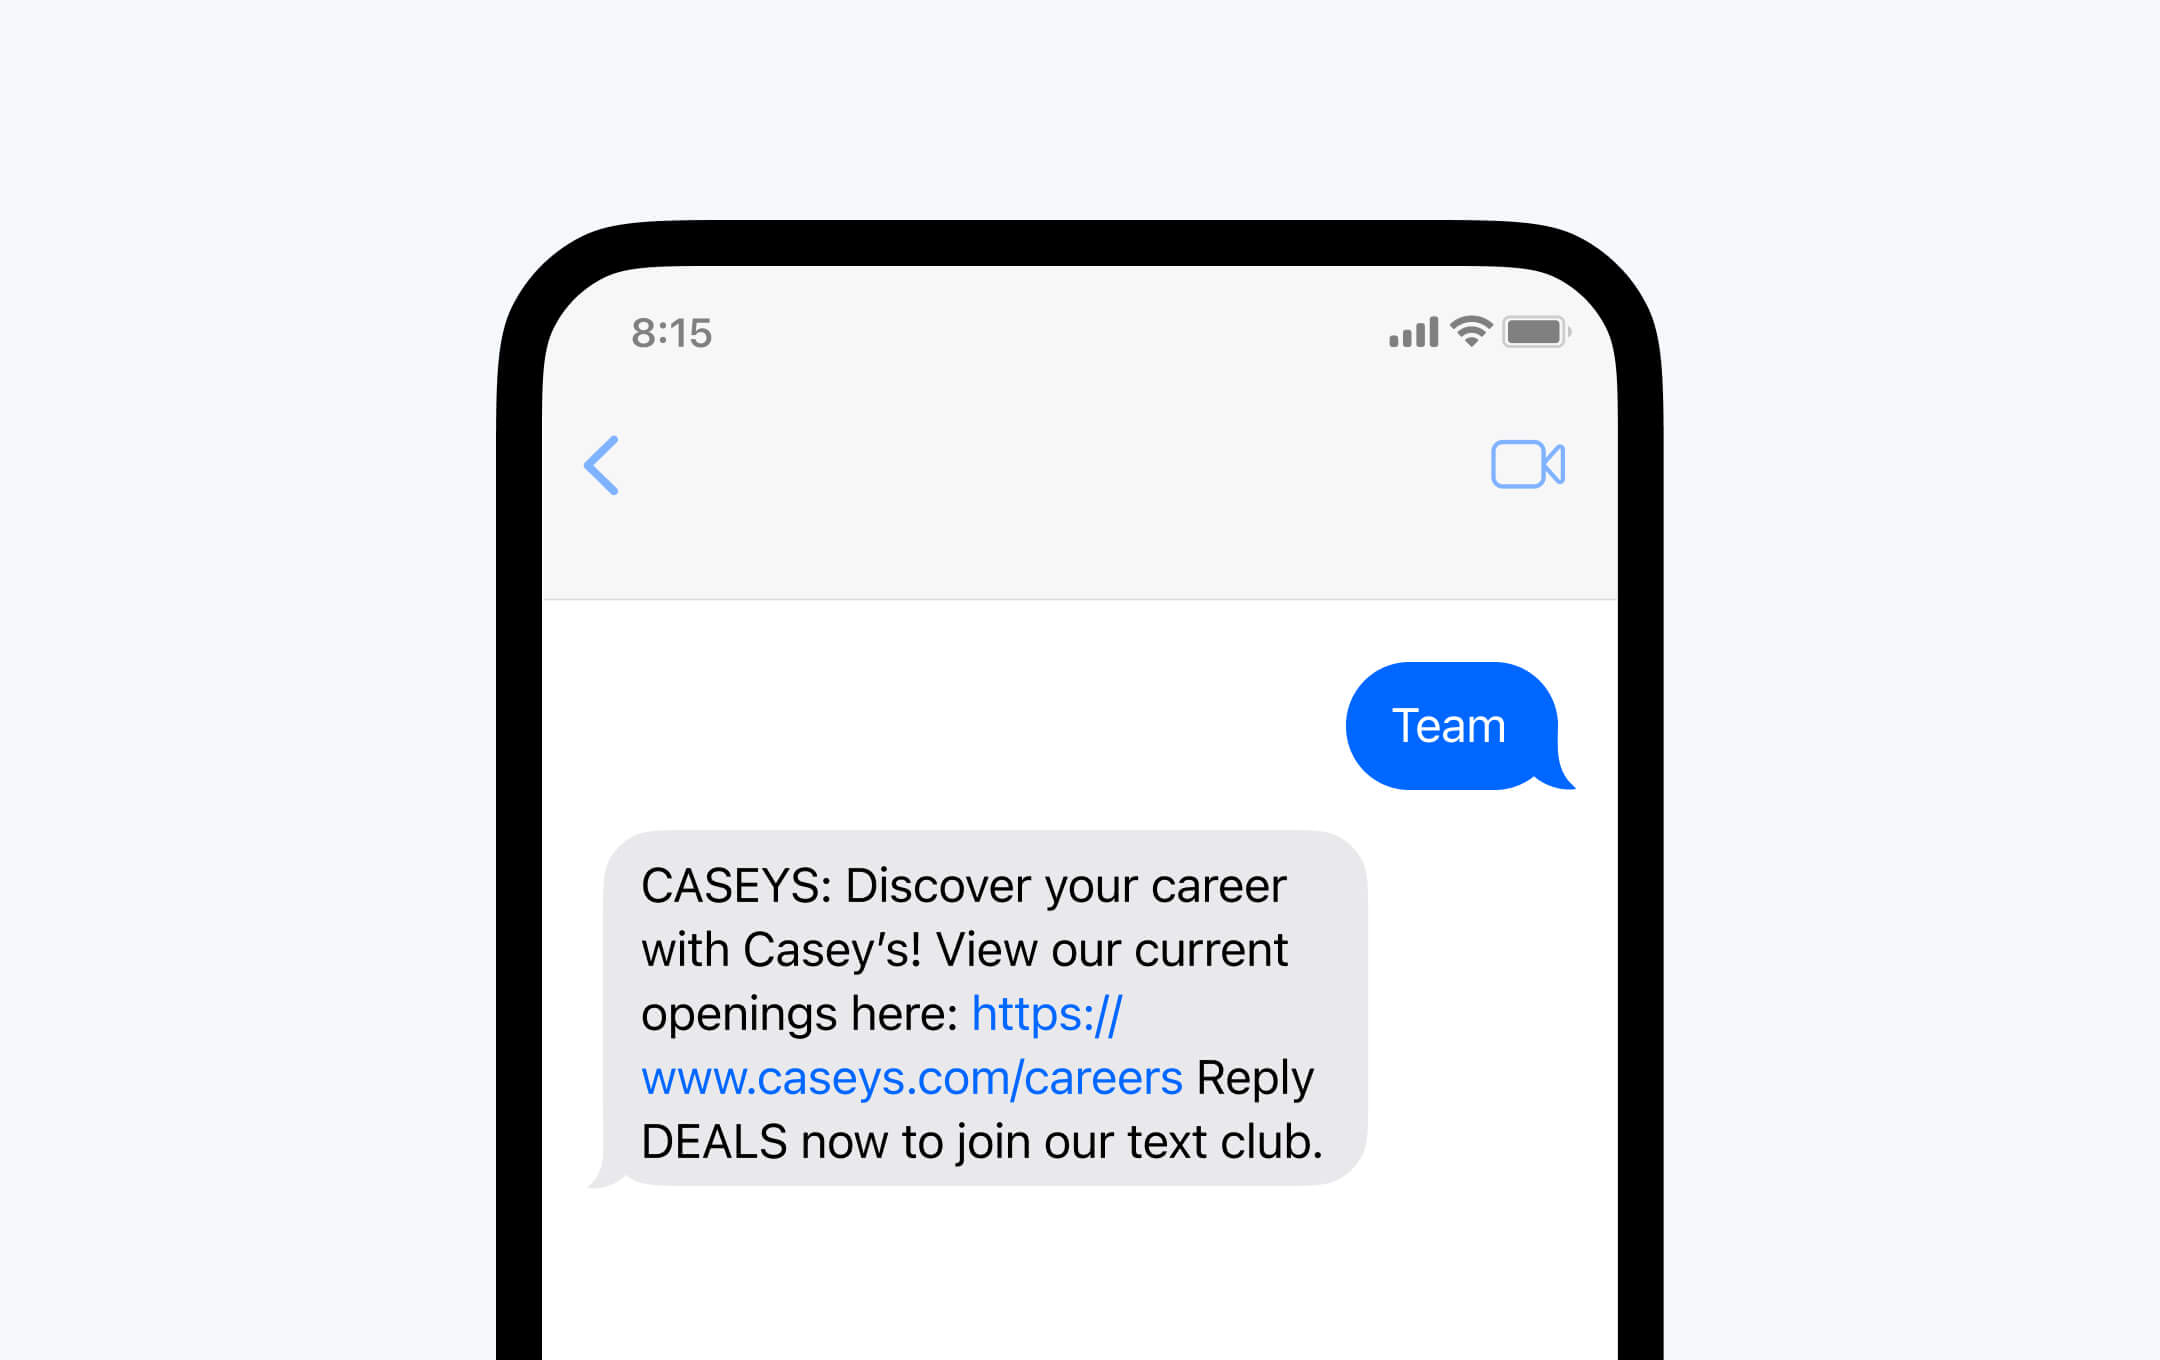 A screenshot of a smartphone messaging app displaying a text message bubble with the word 'Team' sent from the user. The reply bubble shows a message from CASEY'S, inviting the user to 'Discover your career with Casey's! View our current openings here: [link to Casey's career page] Reply DEALS now to join our text club.' This illustrates a 'text to apply for job openings' service via mobile messaging.